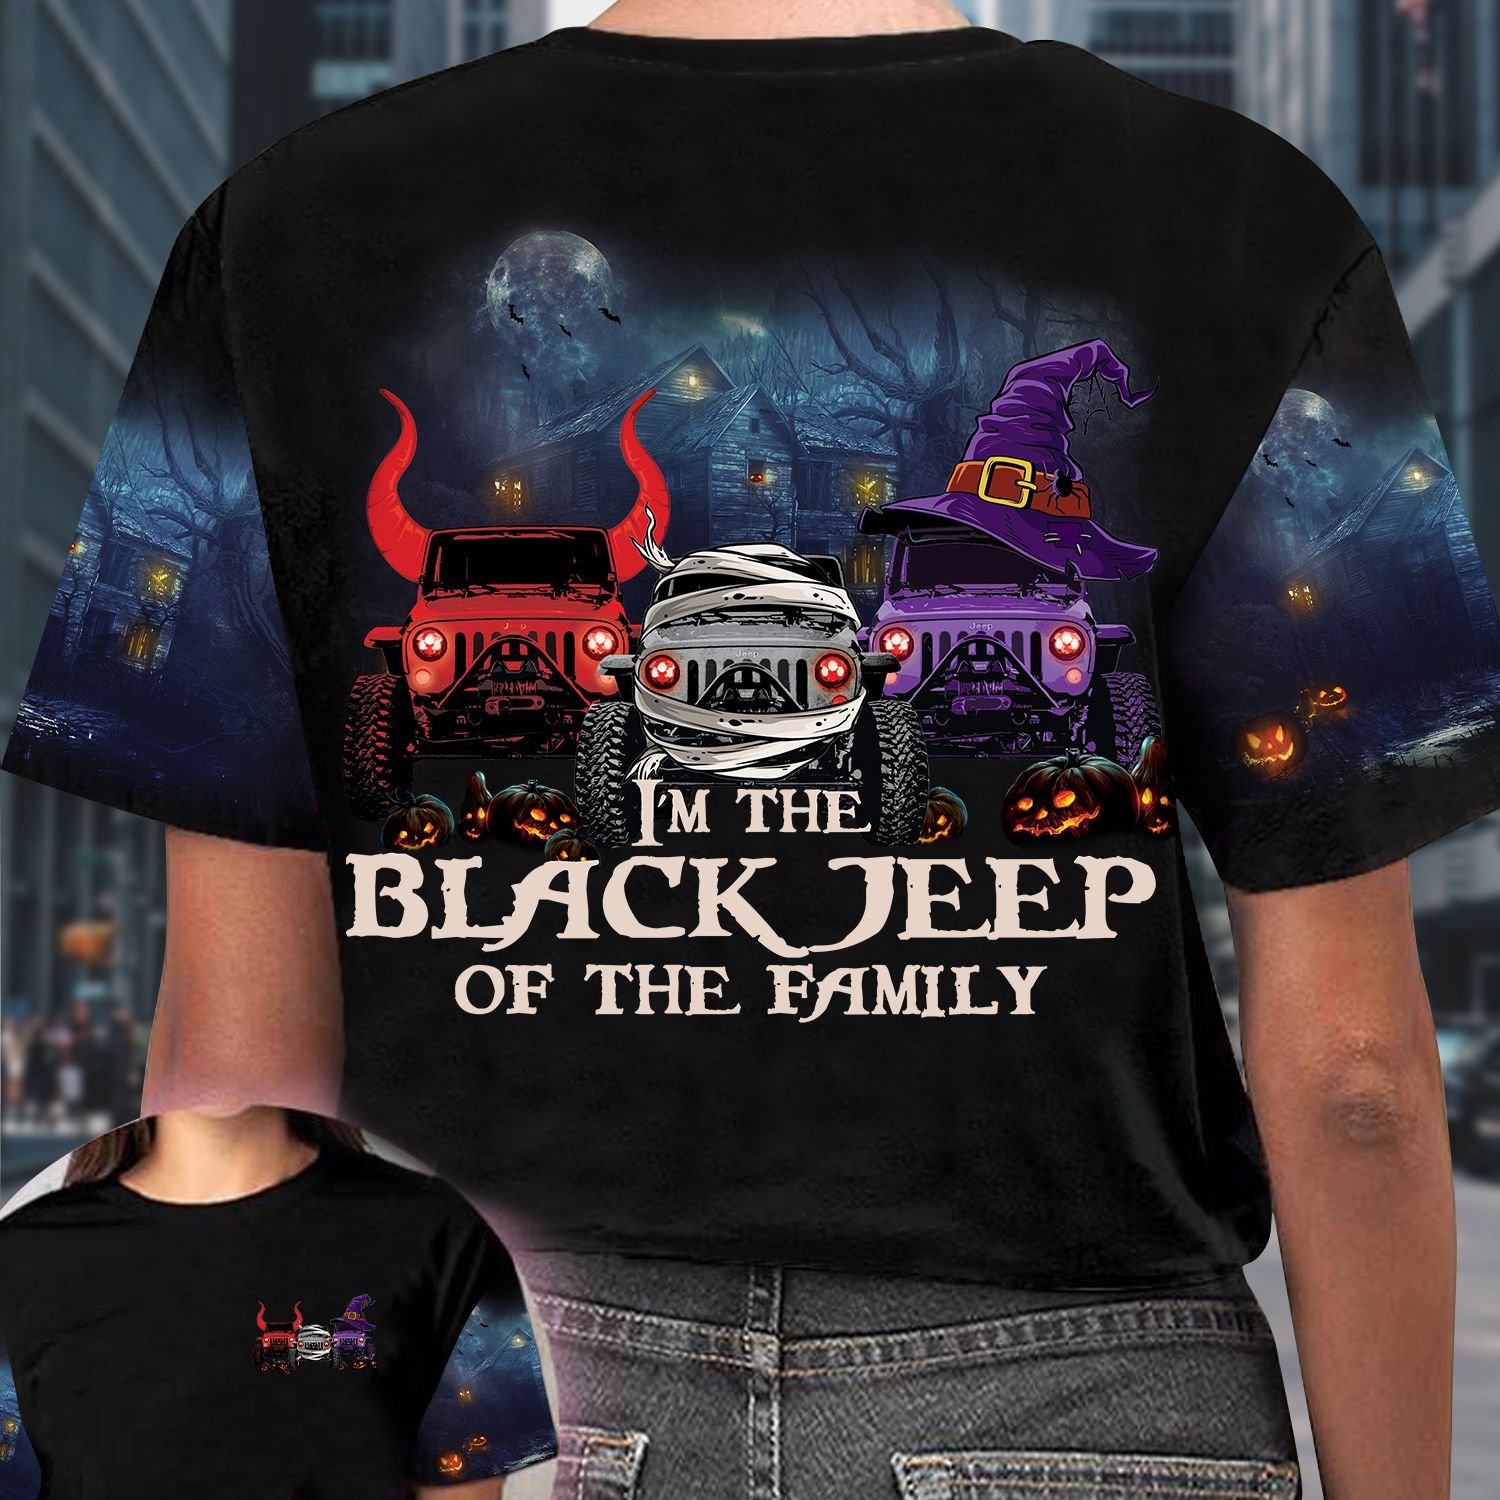 Im a black jeep of the family 3d T shirt